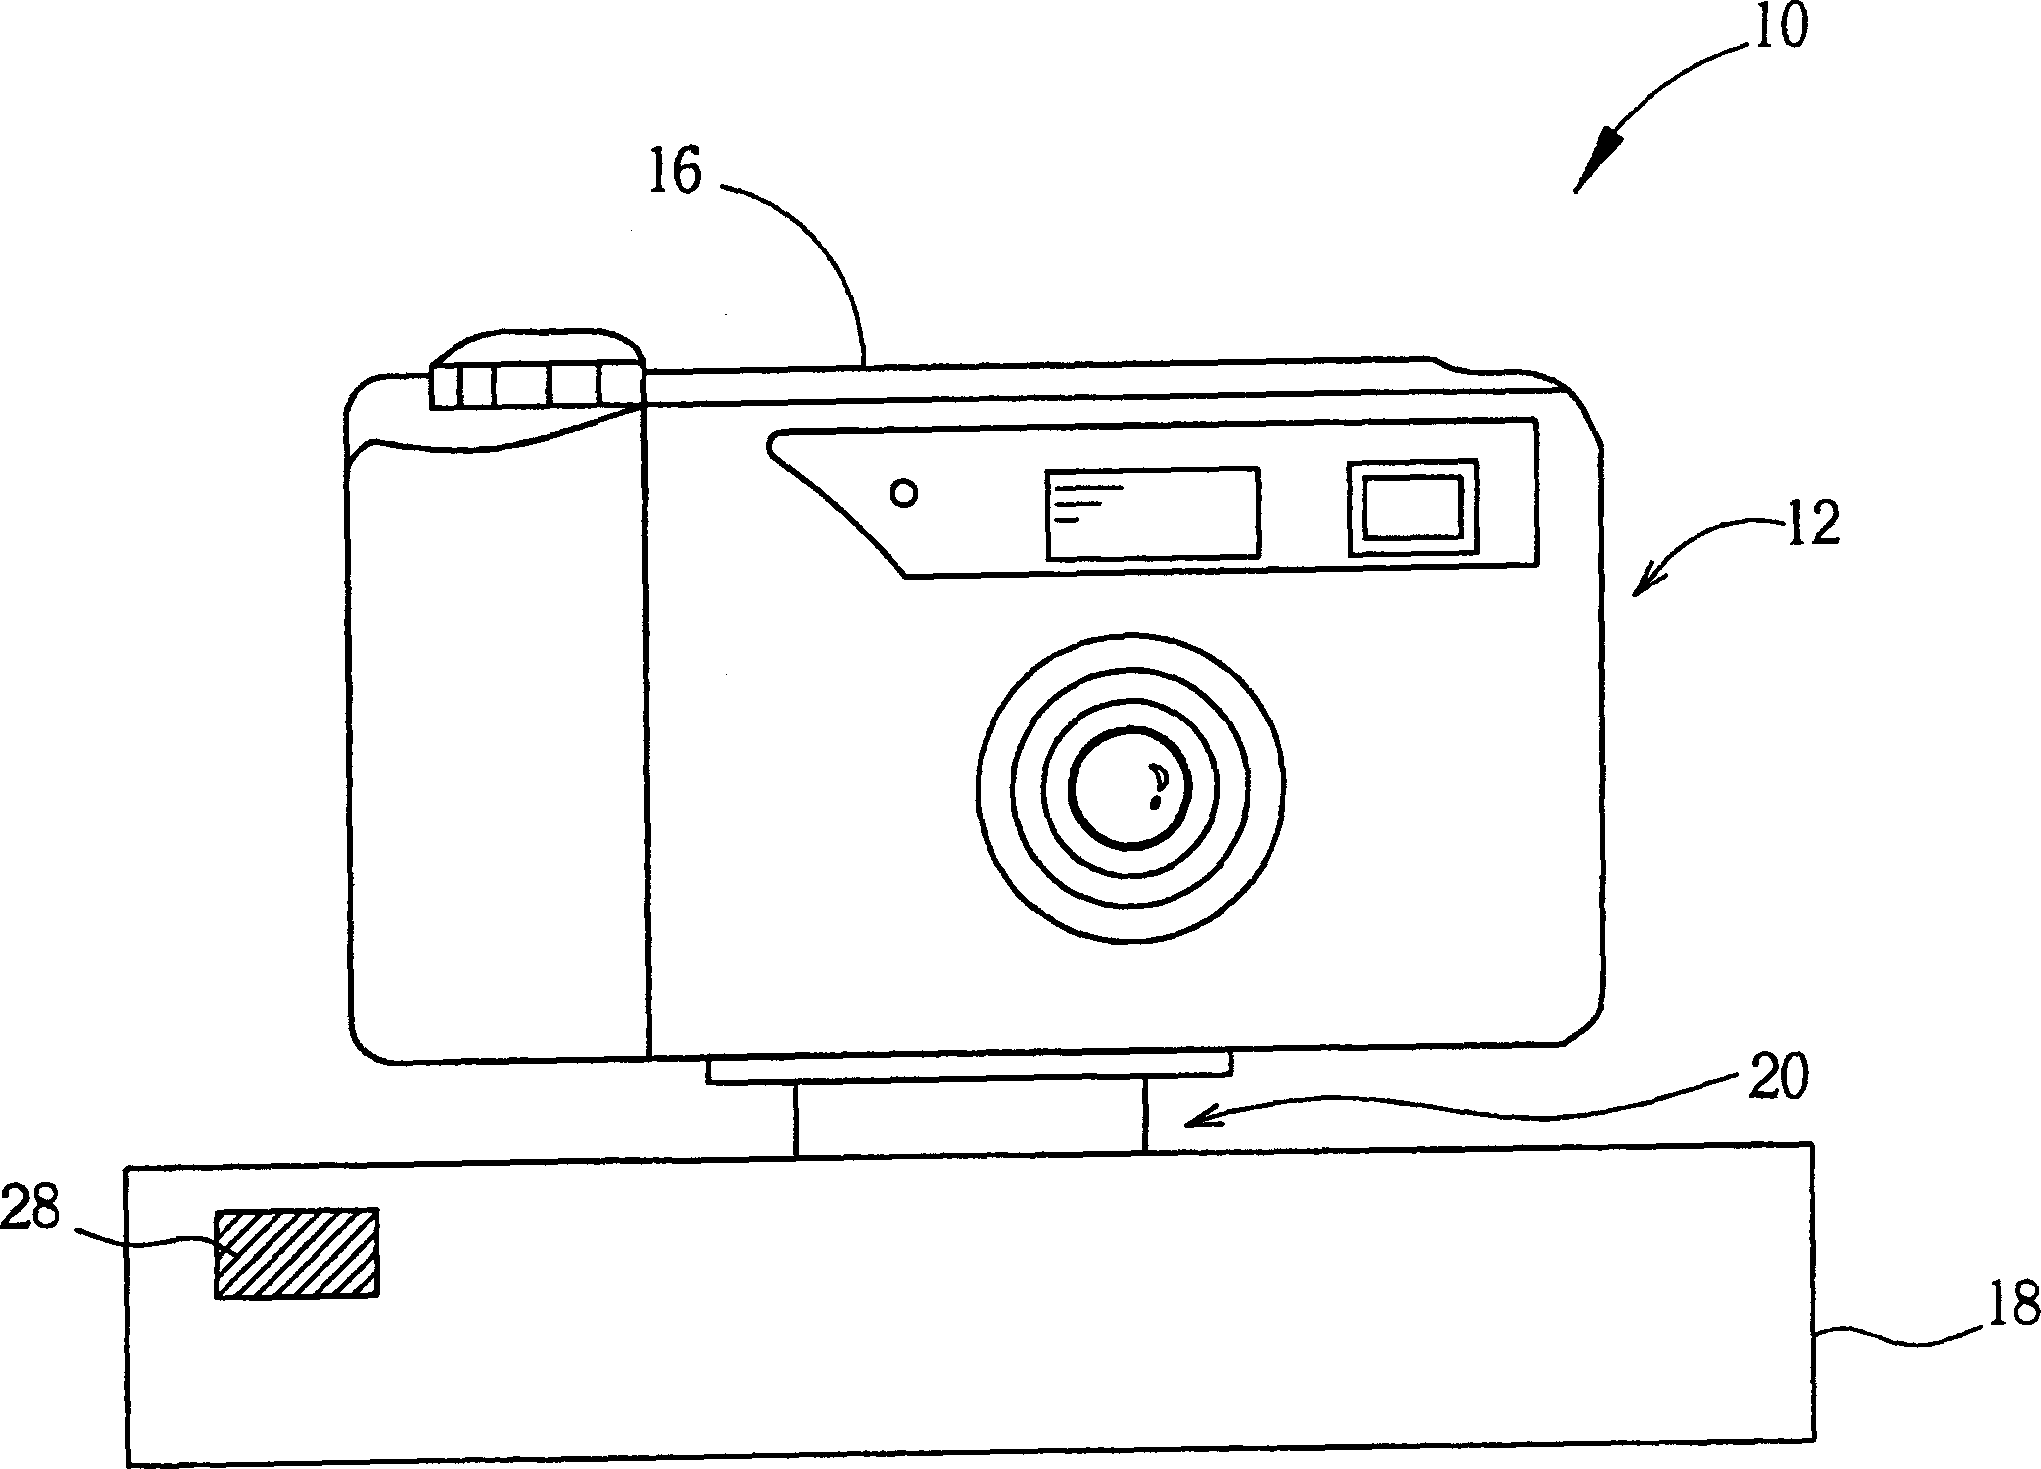 Image shooting system capable of using remote control device to change shooting angle